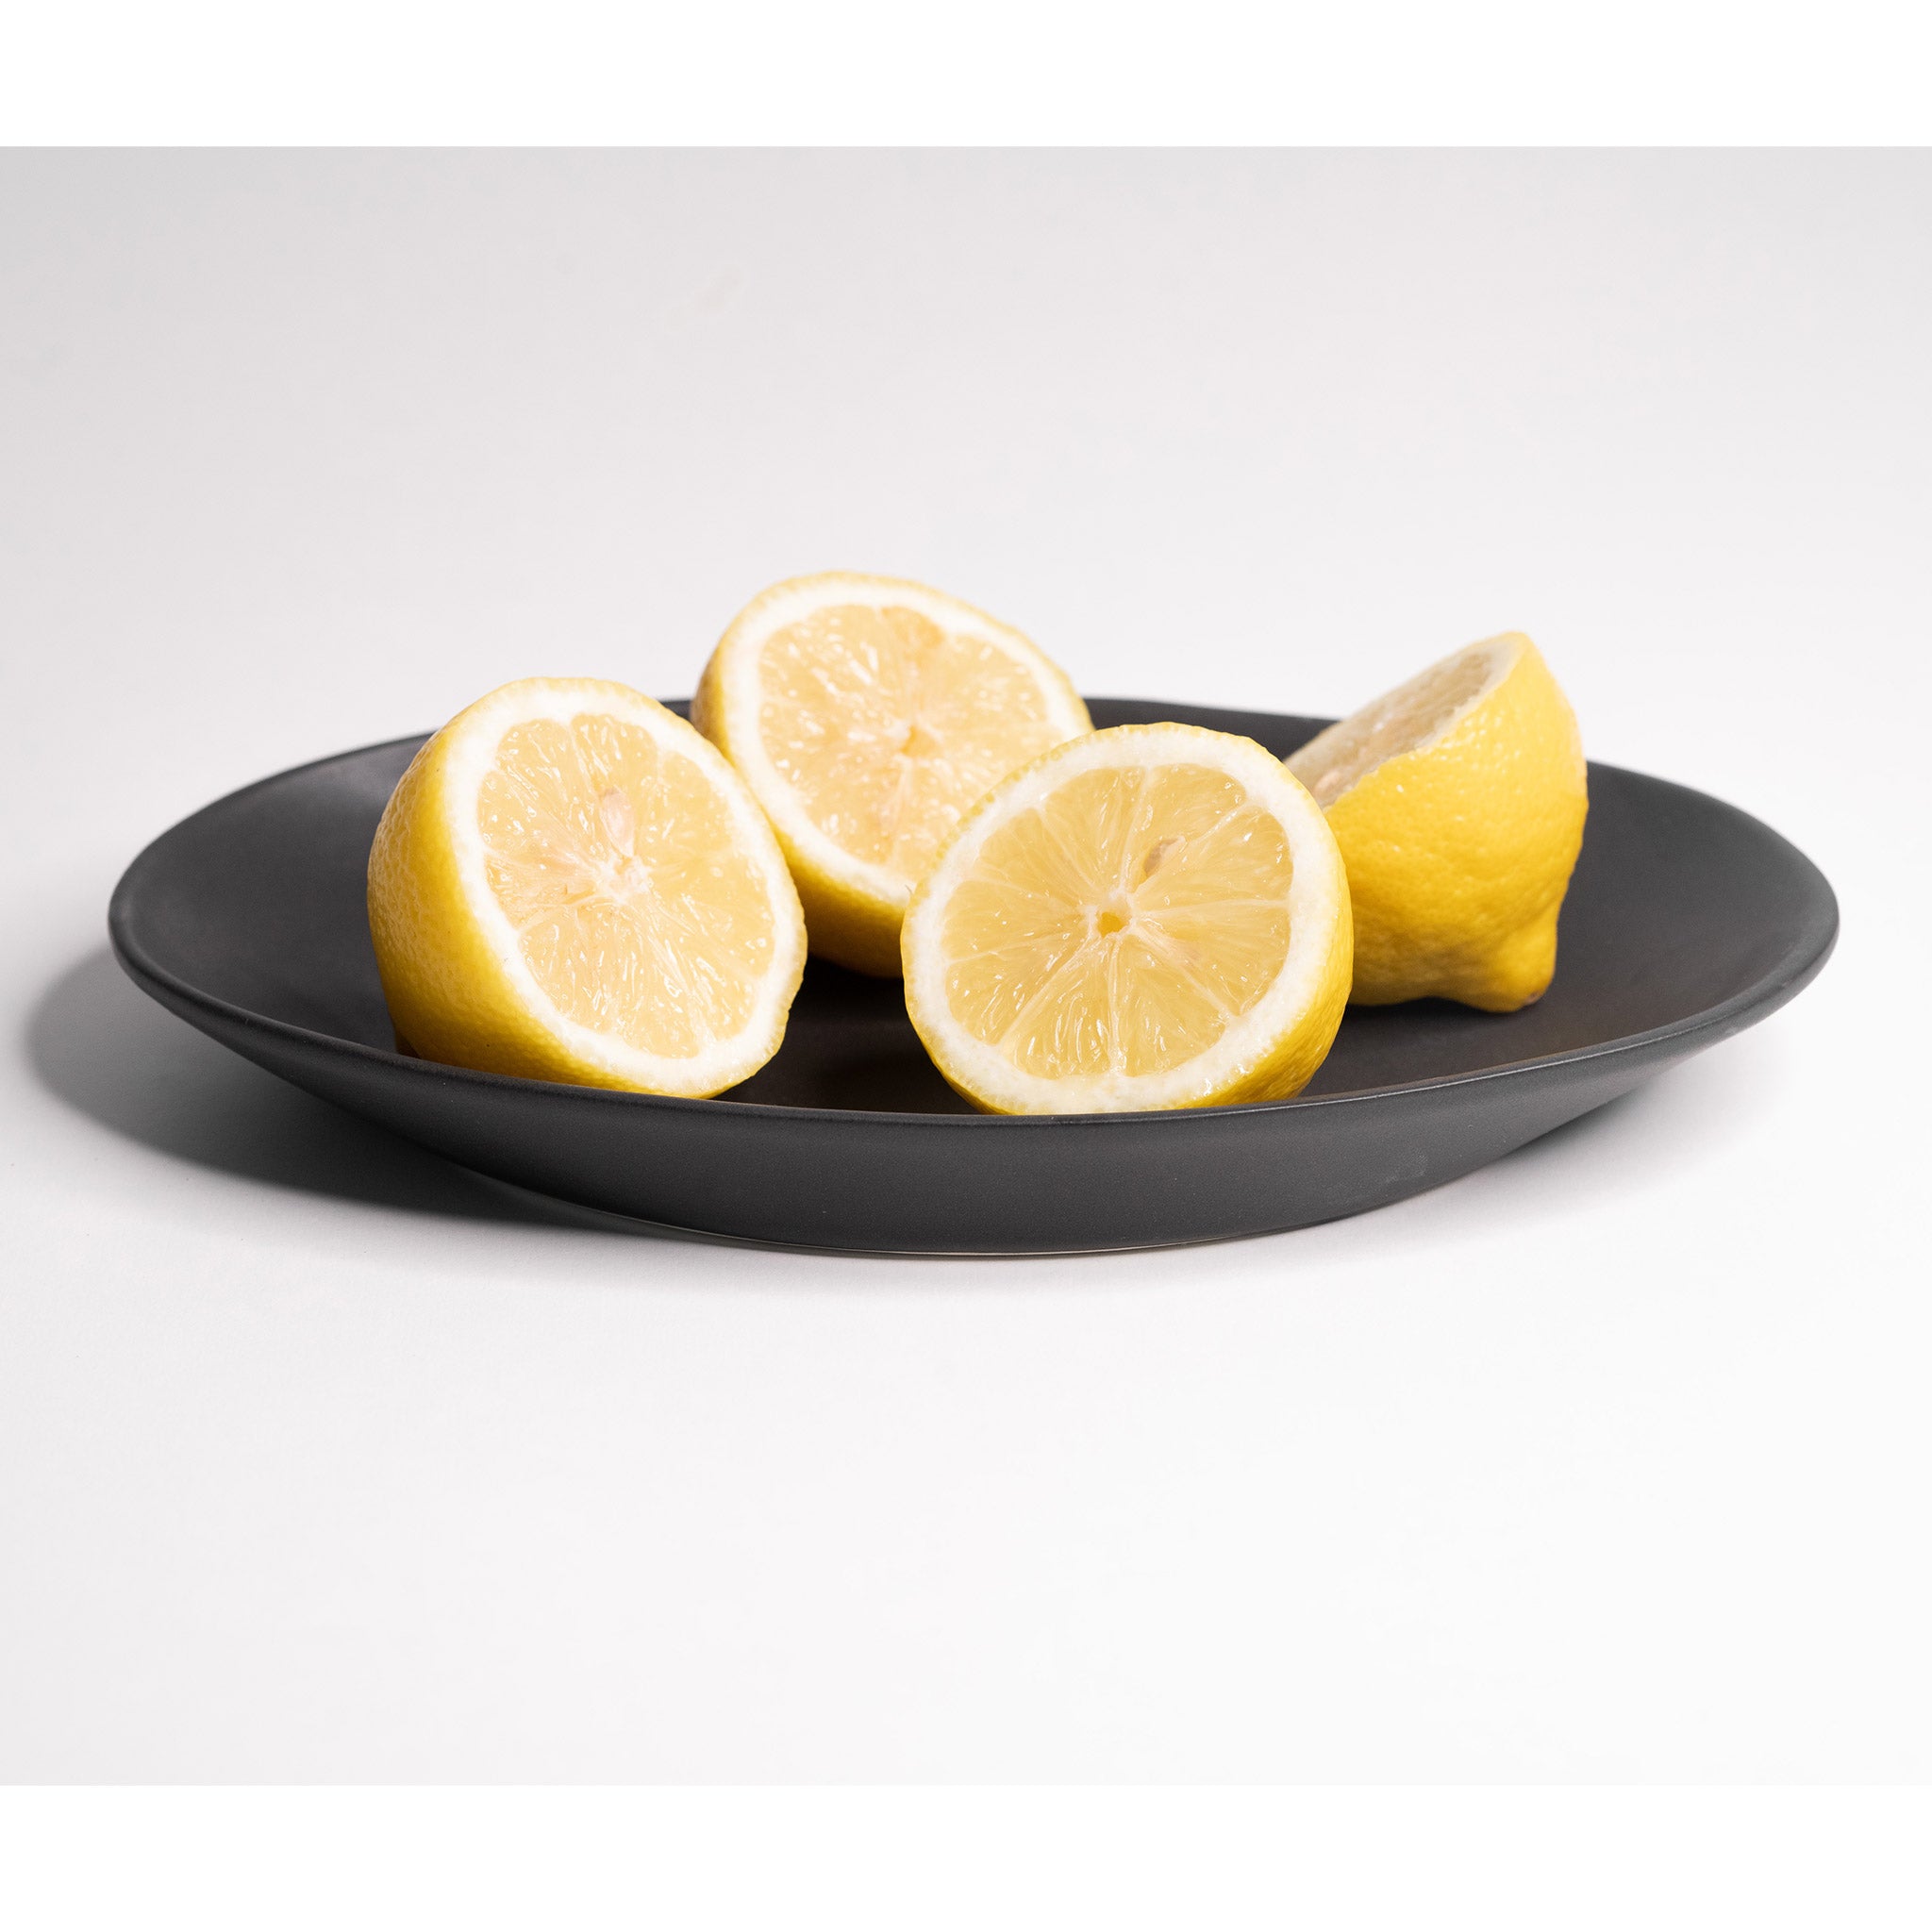 Catchall Porcelain Tray Mica Black The Bright Angle